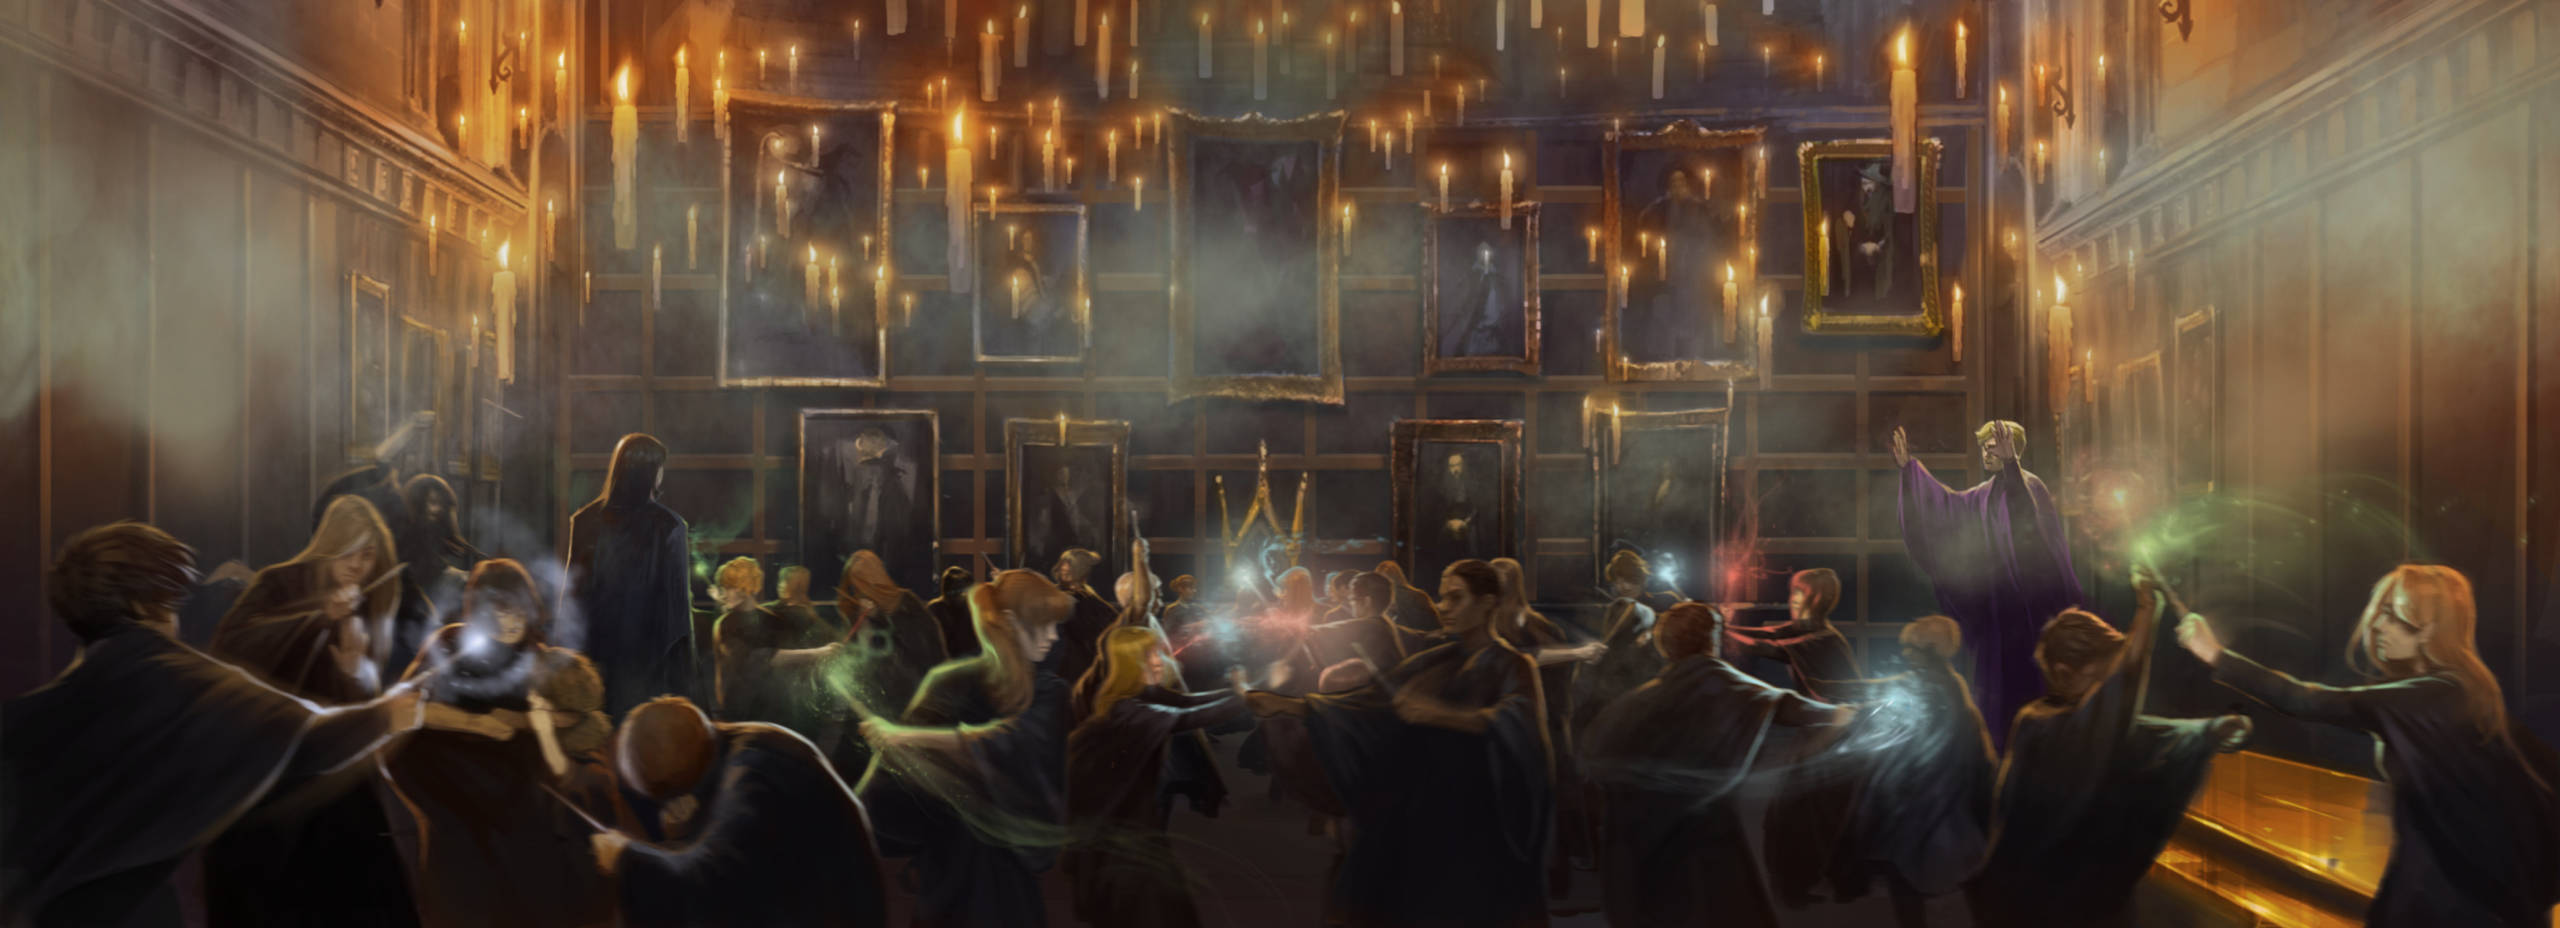 The Great Hall during Duelling Club